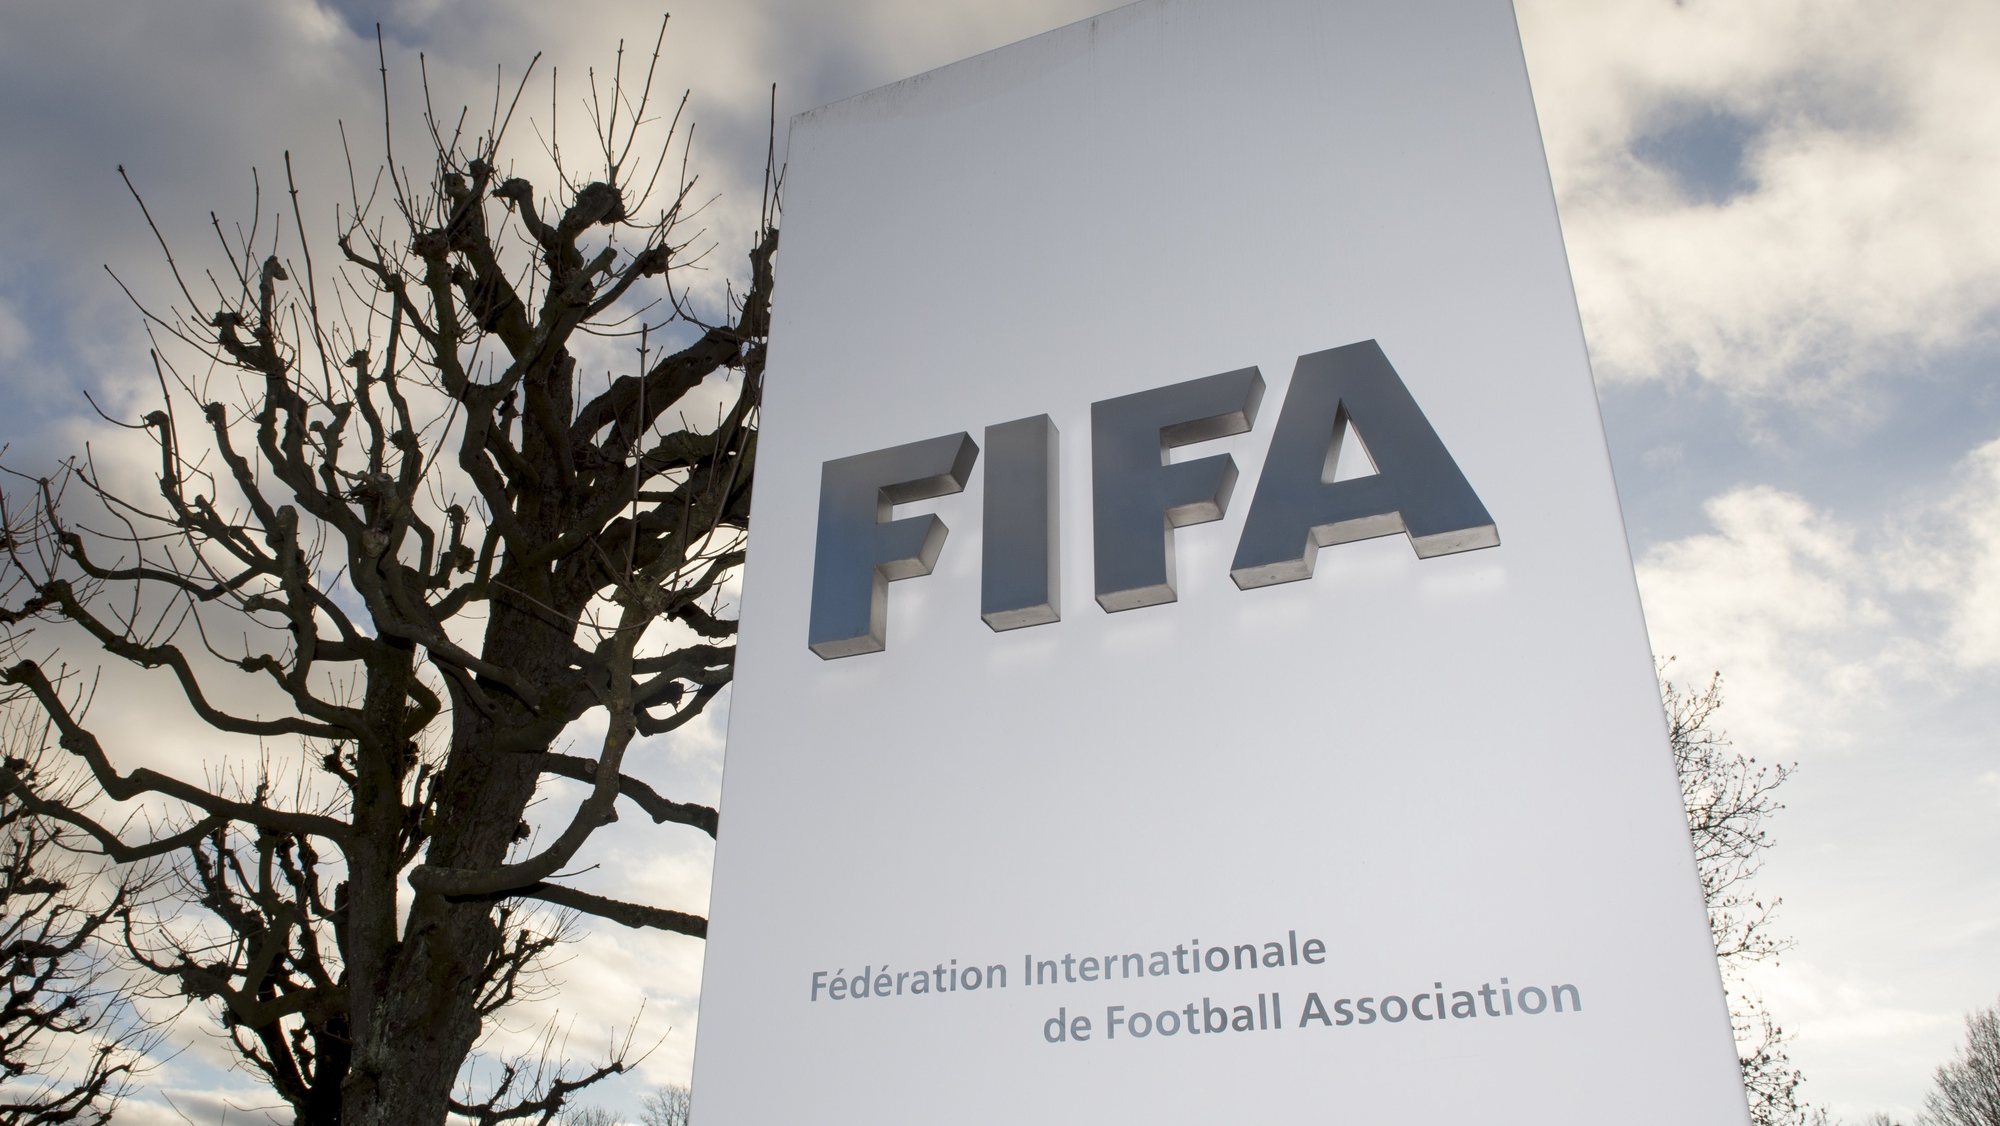 epa09792207 (FILE) - The FIFA logo is pictured outside of the FIFA Headquarters &#039;Home of FIFA&#039; in Zurich, Switzerland, 17 December 2015 (re-issued on 28 February 2022). The world&#039;s football governing body FIFA together with the governing body of European football UEFA announced on 28 February 2022 to have decided together &#039;that all Russian teams, whether national representative teams or club teams, shall be suspended from participation in both FIFA and UEFA competitions until further notice&#039;.  EPA/WALTER BIERI *** Local Caption *** 52472788